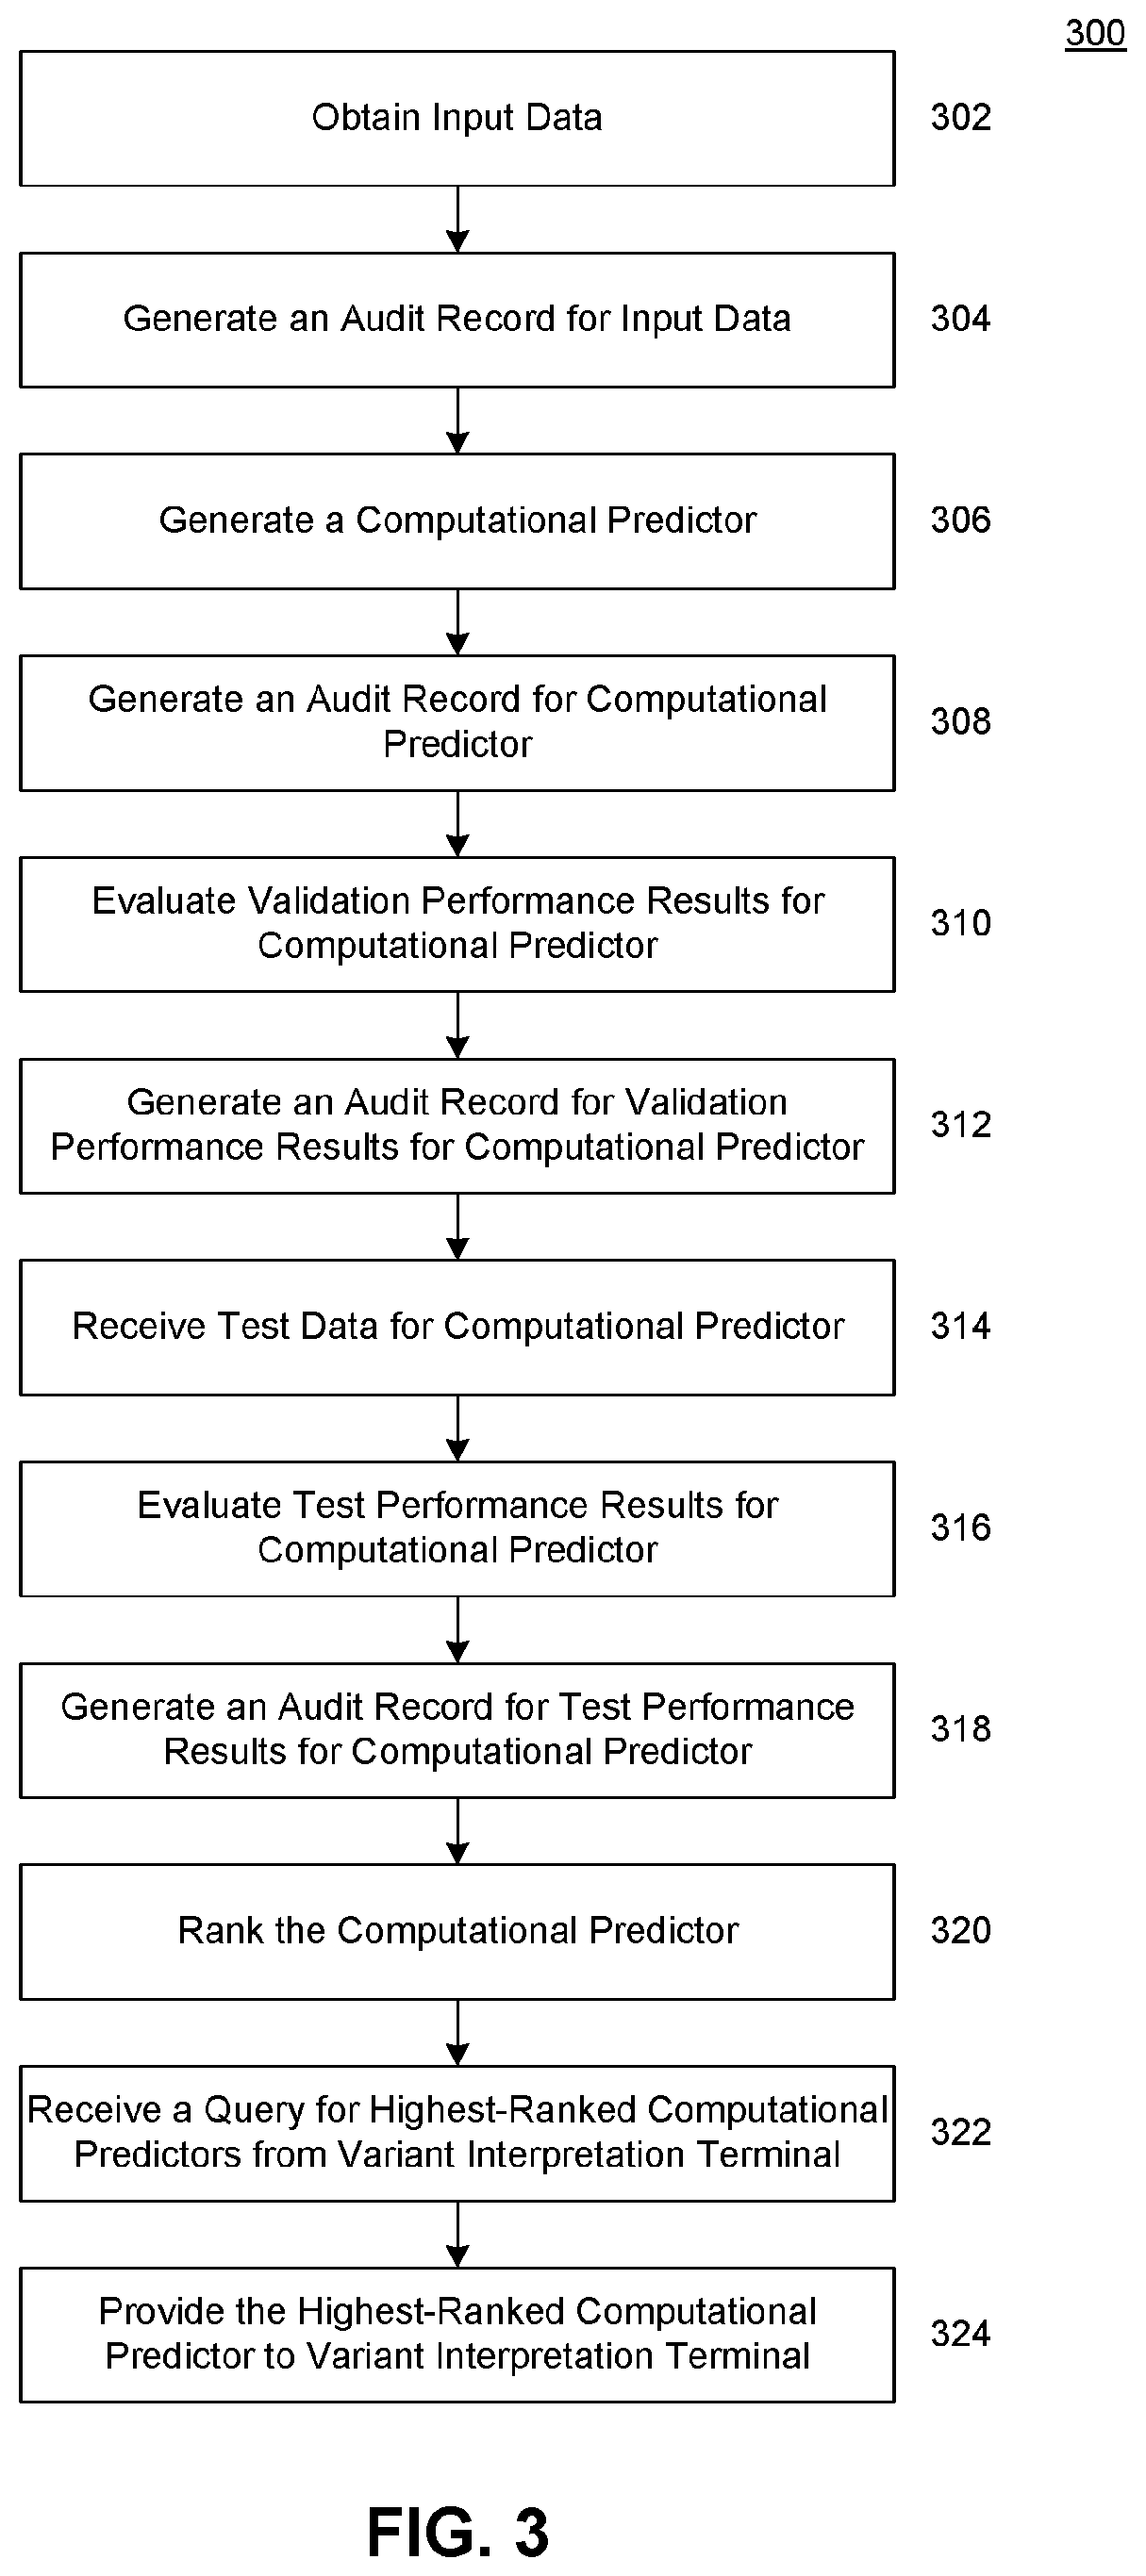 Molecular evidence platform for auditable, continuous optimization of variant interpretation in genetic and genomic testing and analysis